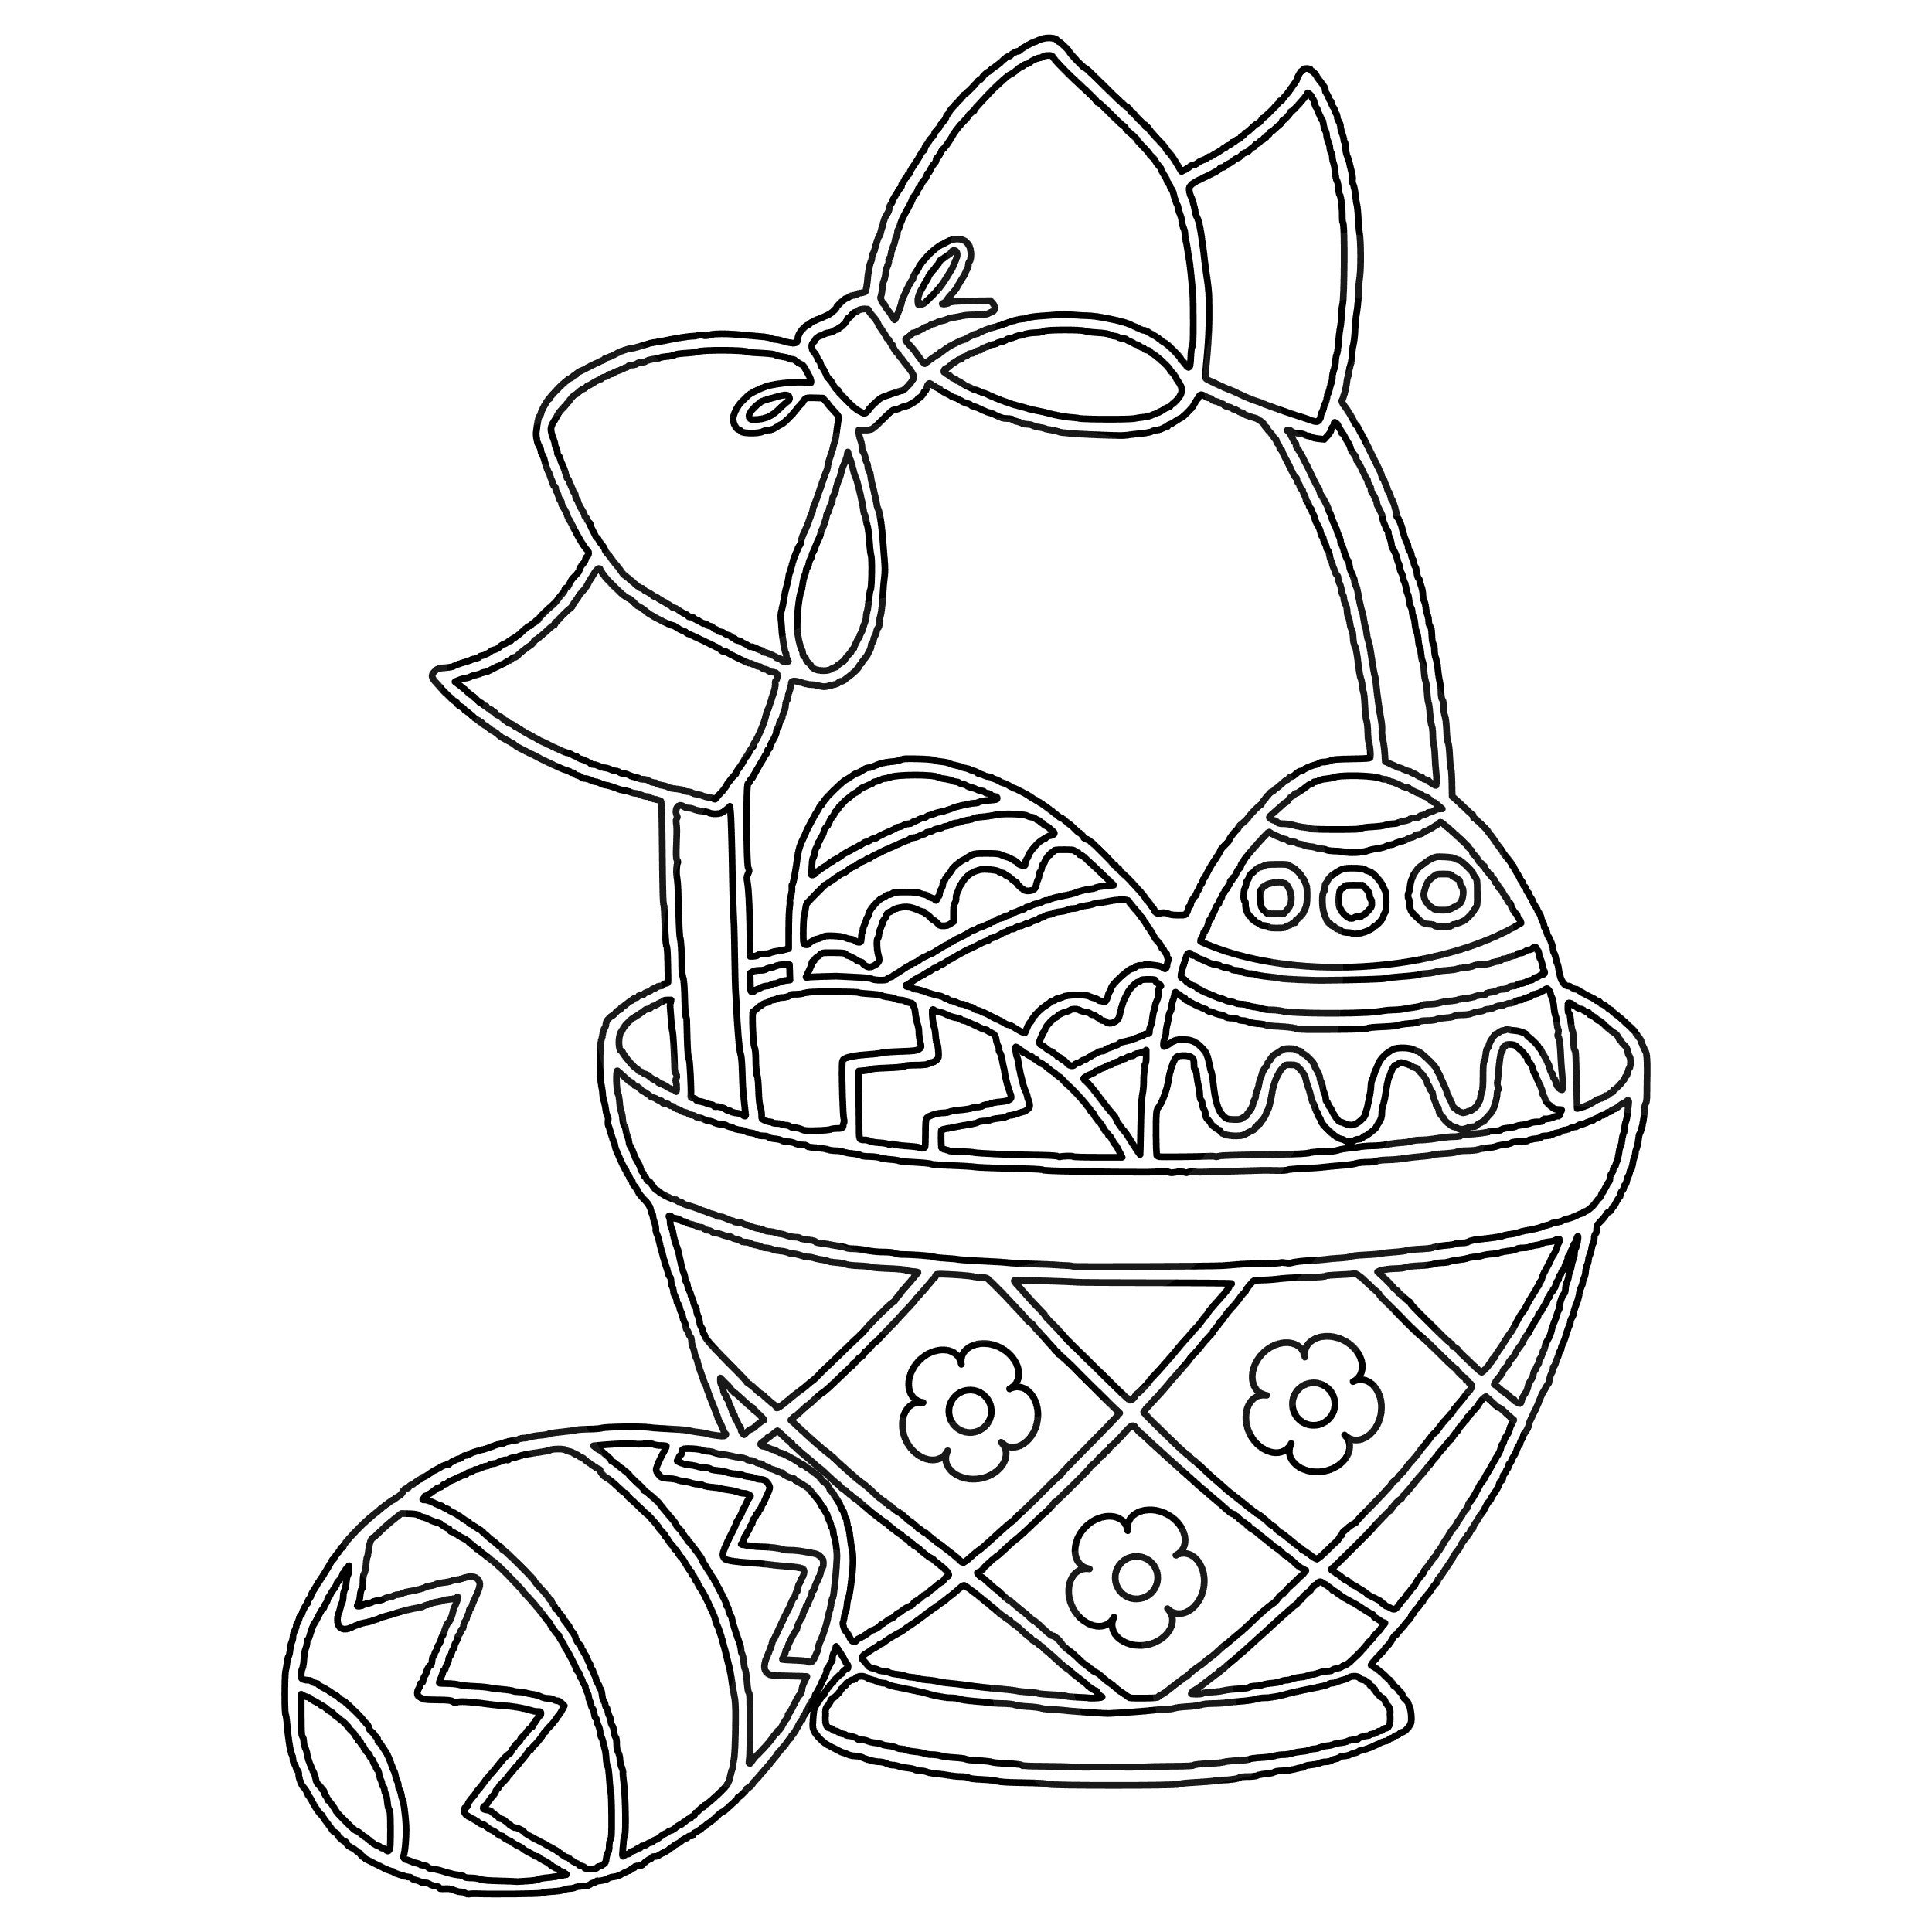 Easter basket coloring page easter egg colouring in pageeaster egg basket svgprintable silhouette cut files cricut cut files svg files